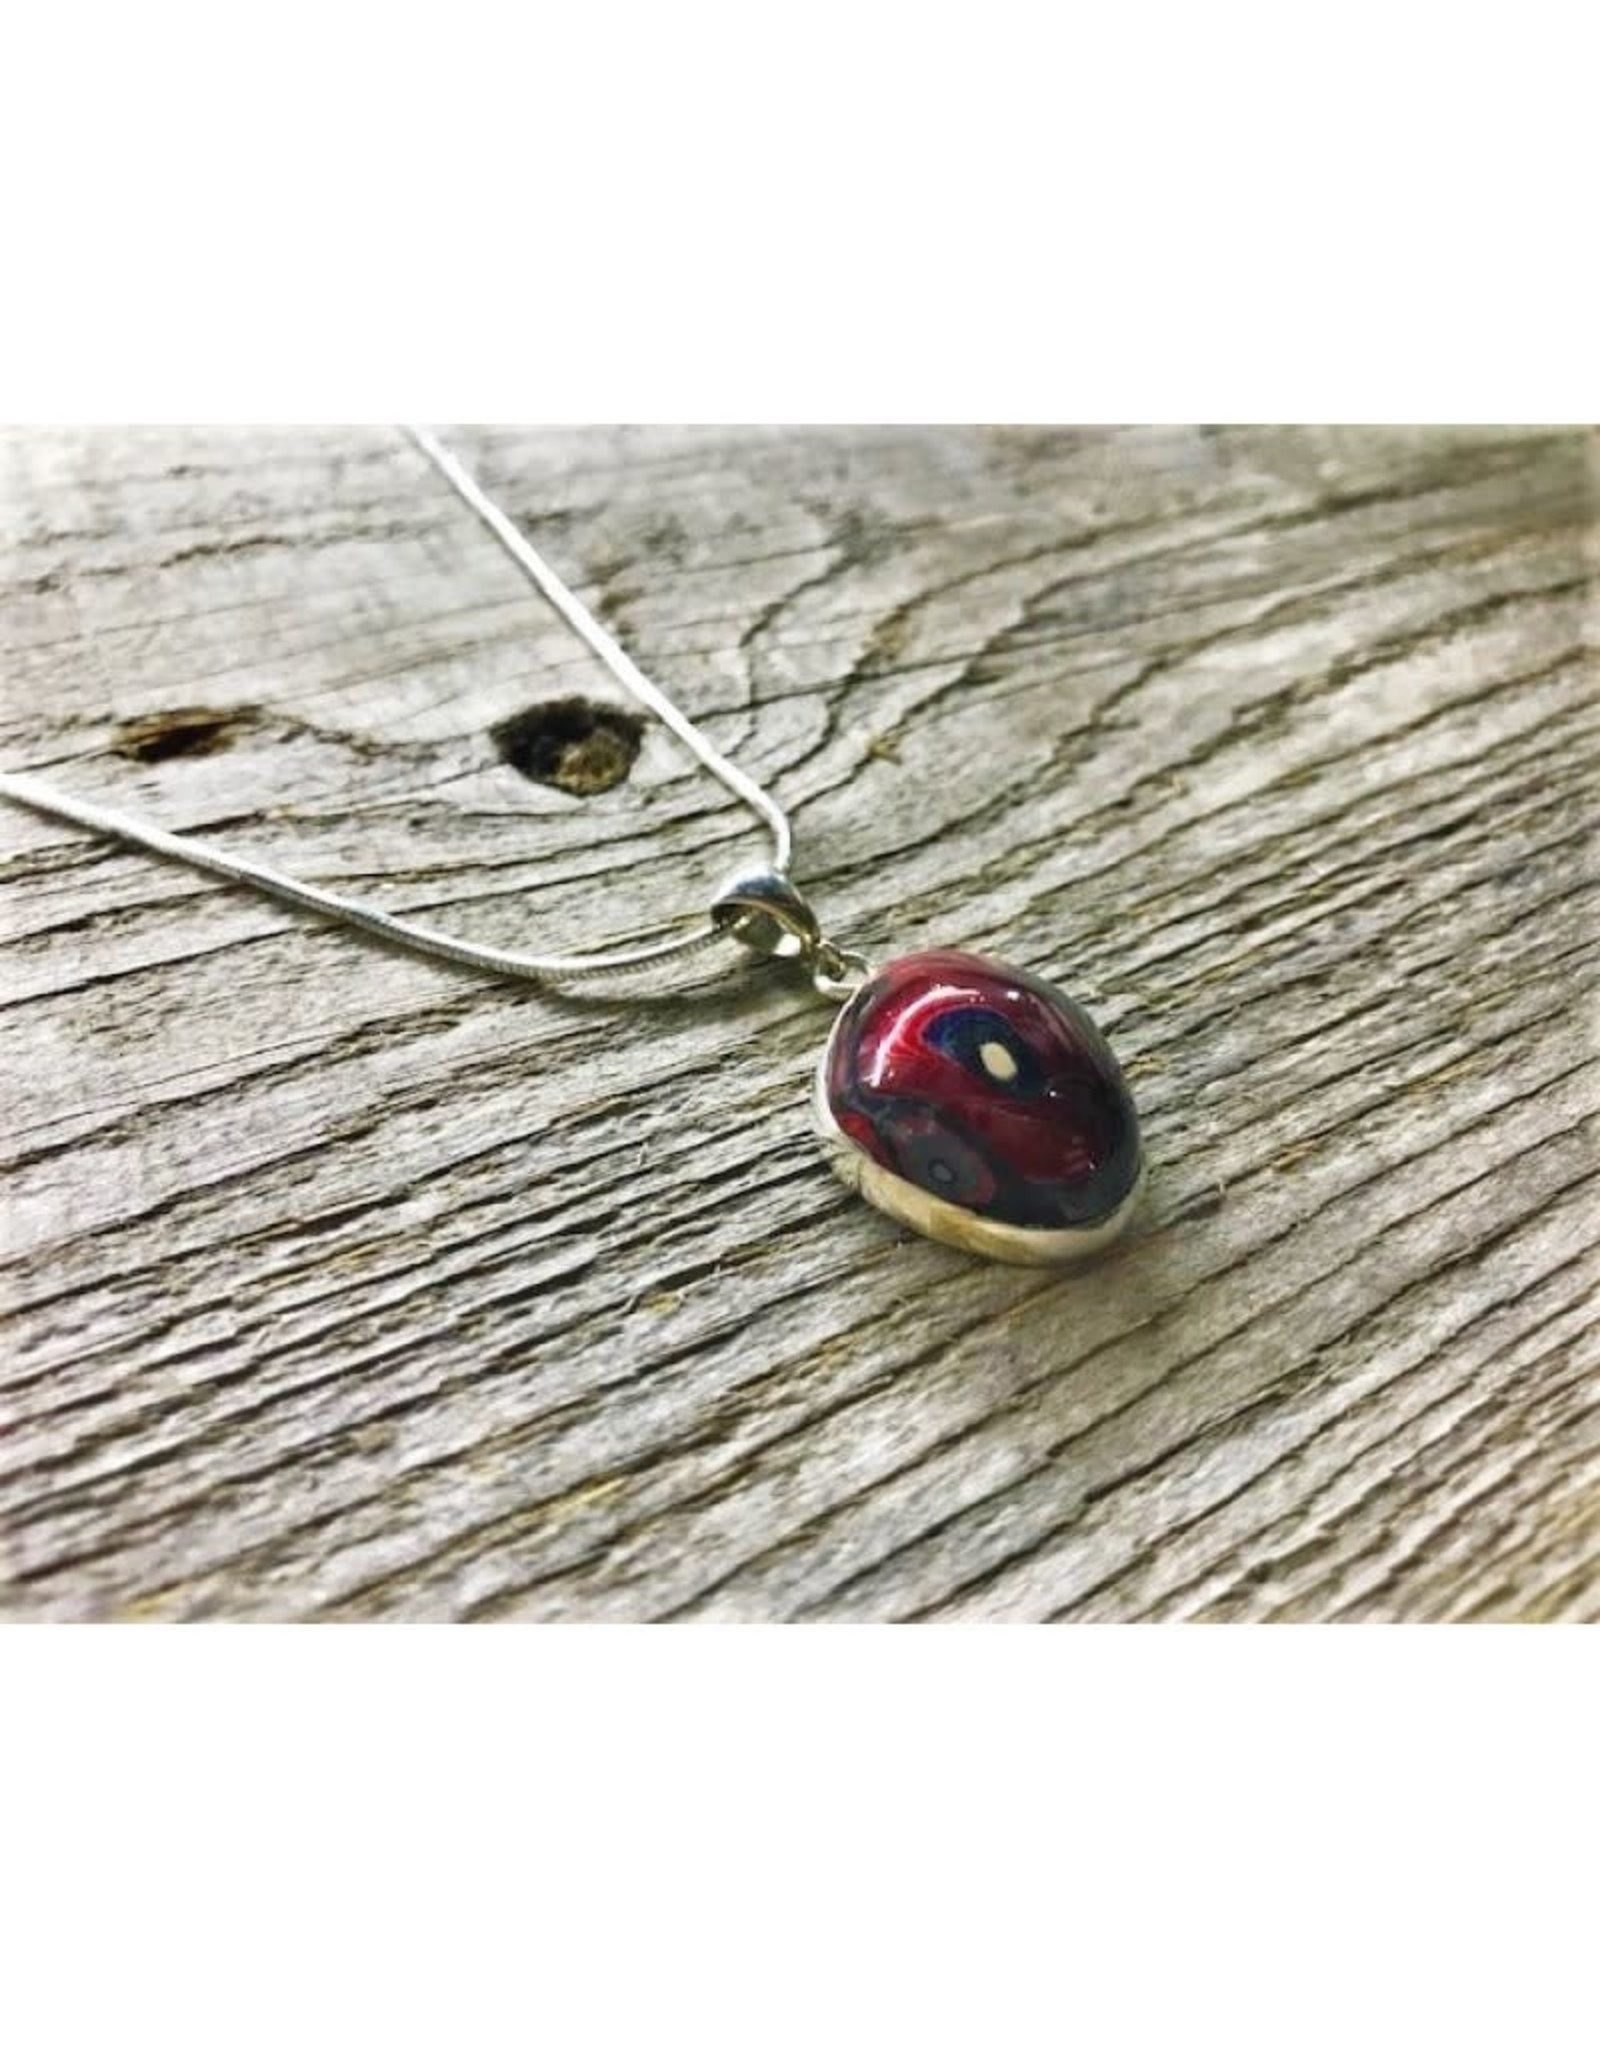 Necklace Pendant - Red Fordite